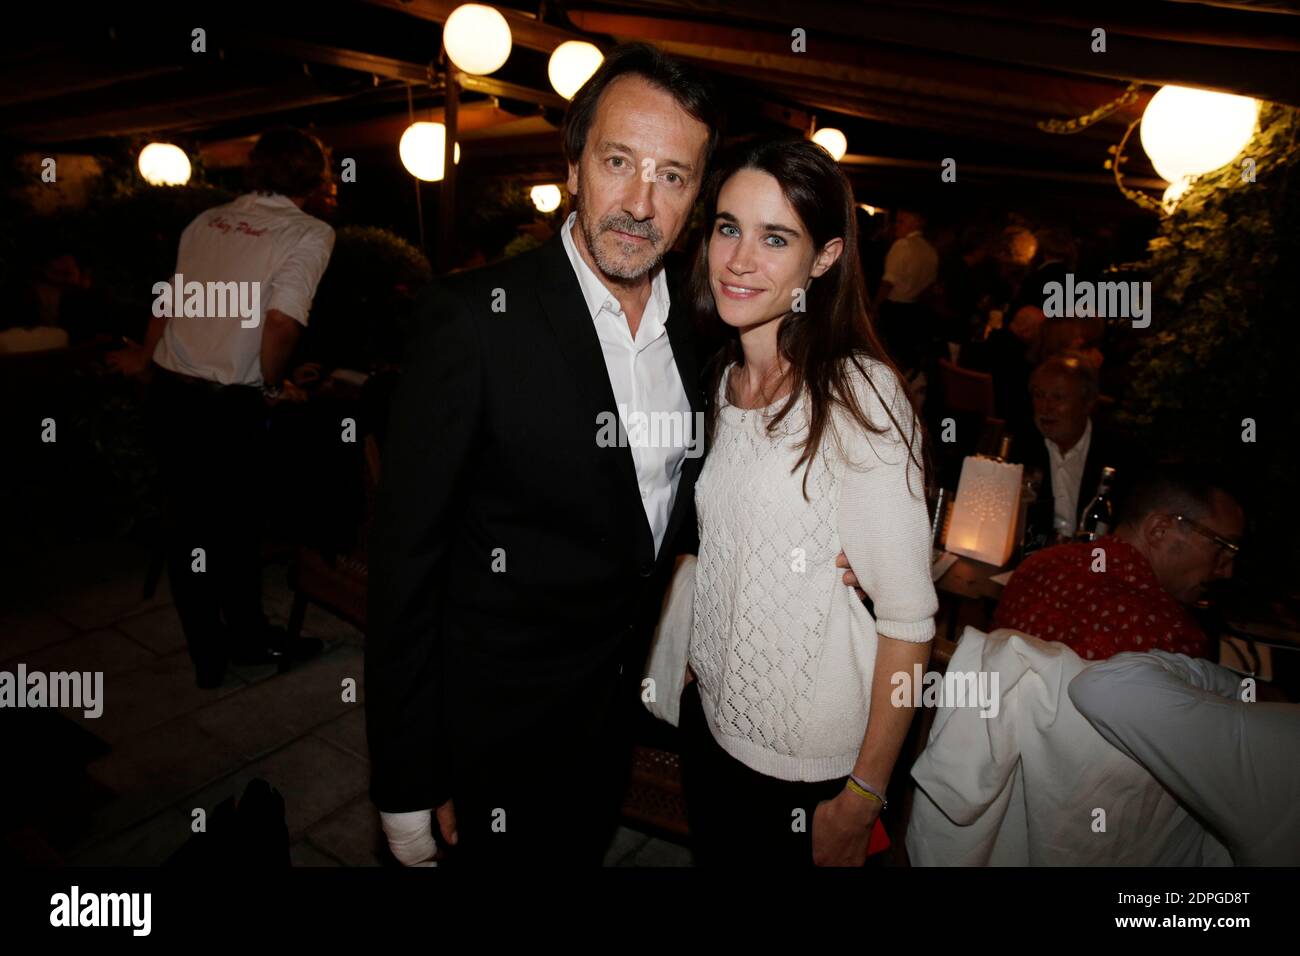 EXCLUSIVE. Jean-Hugues Anglade and his wife Charlotte Leloup attending the  opening party of the 8th Angouleme Film Festival, in Angouleme, France on  August 25, 2015. Photo by Jerome Domine/ABACAPRESS.COM Stock Photo -